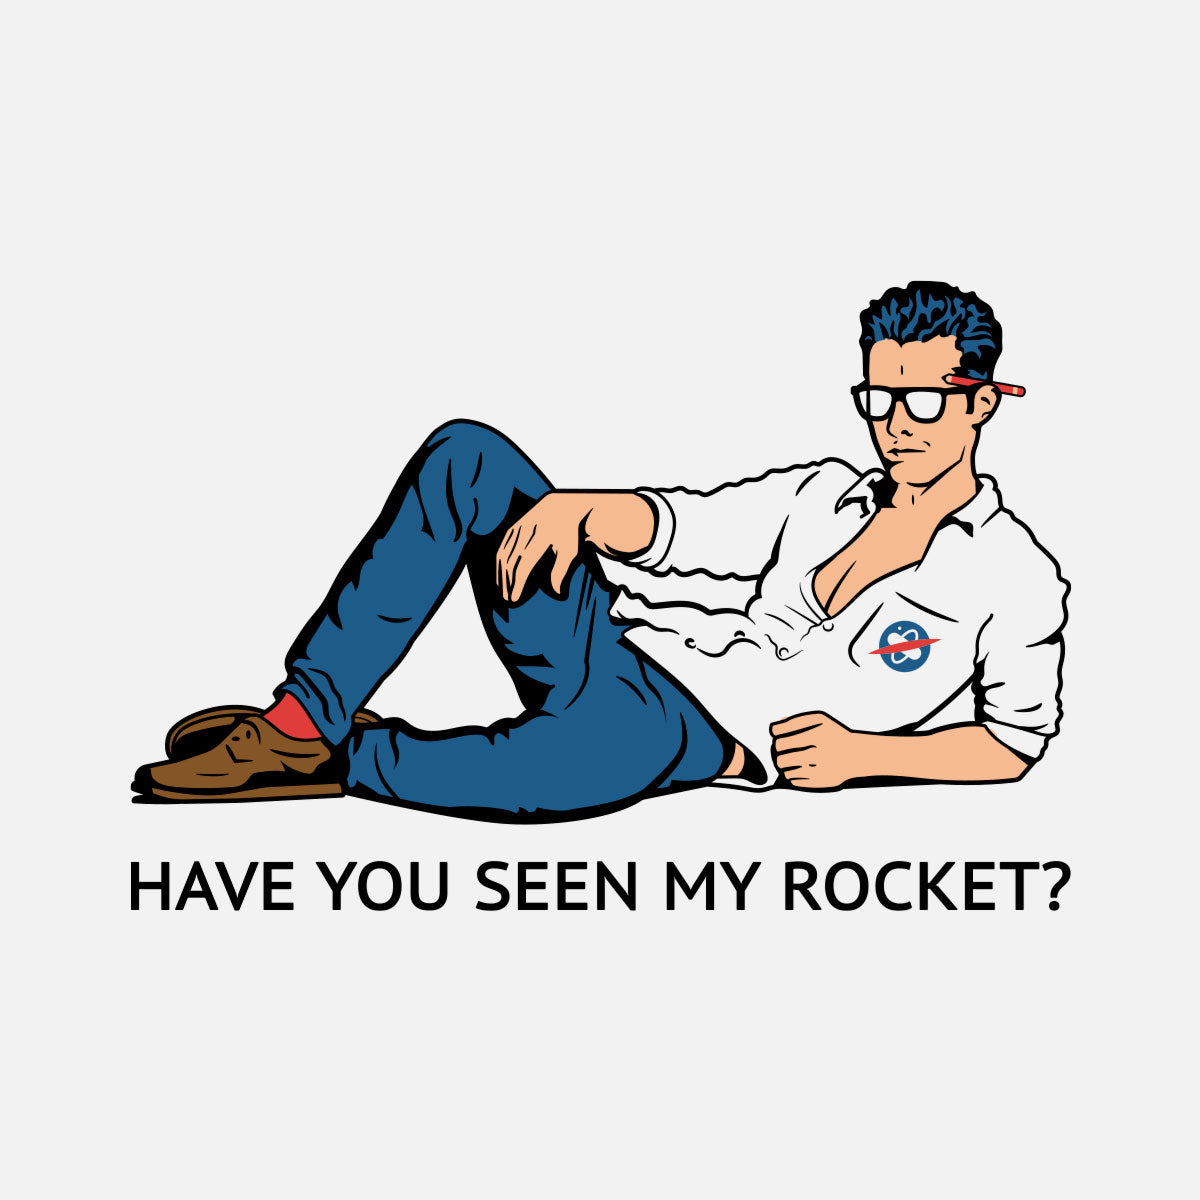 Thumbnail of scientist lounging with text "Have you seen my rocket?" on white background